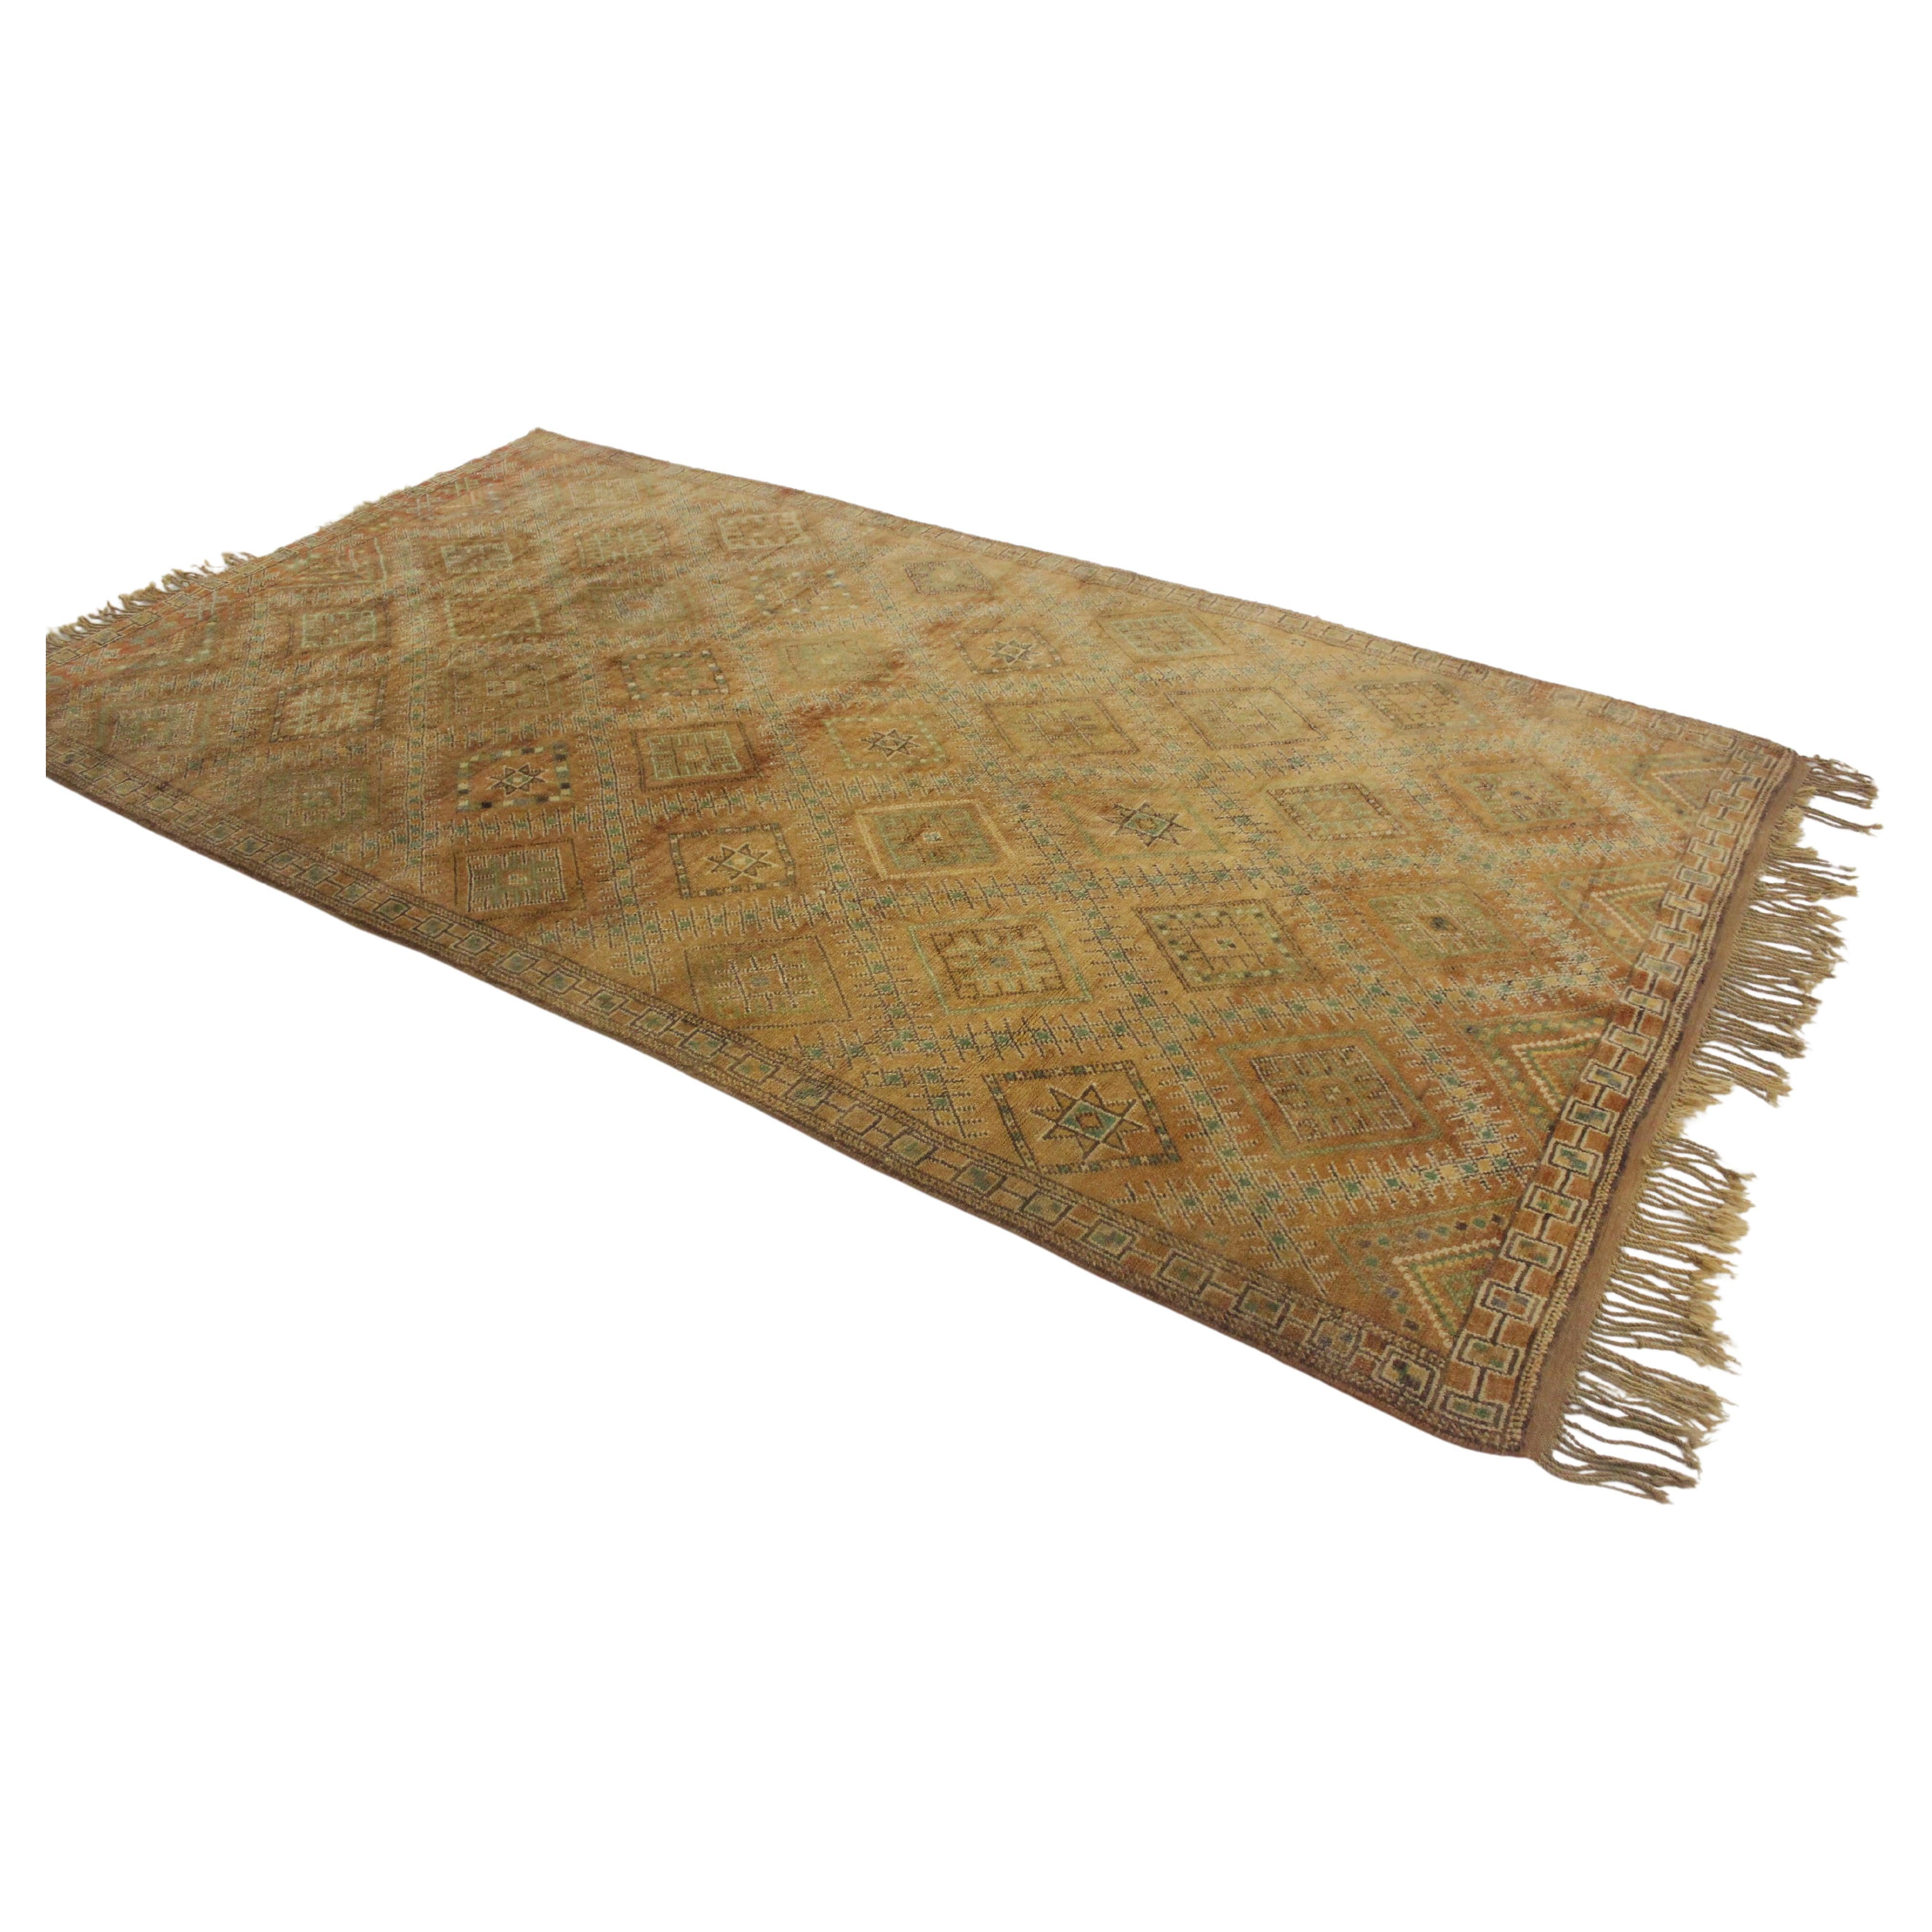 I selected this beautiful Zemmour rug from piles of carpets because of its mix of ochre tones and emerald green colors. With touches of cream popping. This traditional rug shows a classic diamonds pattern with stars designs all over it.

The rug is